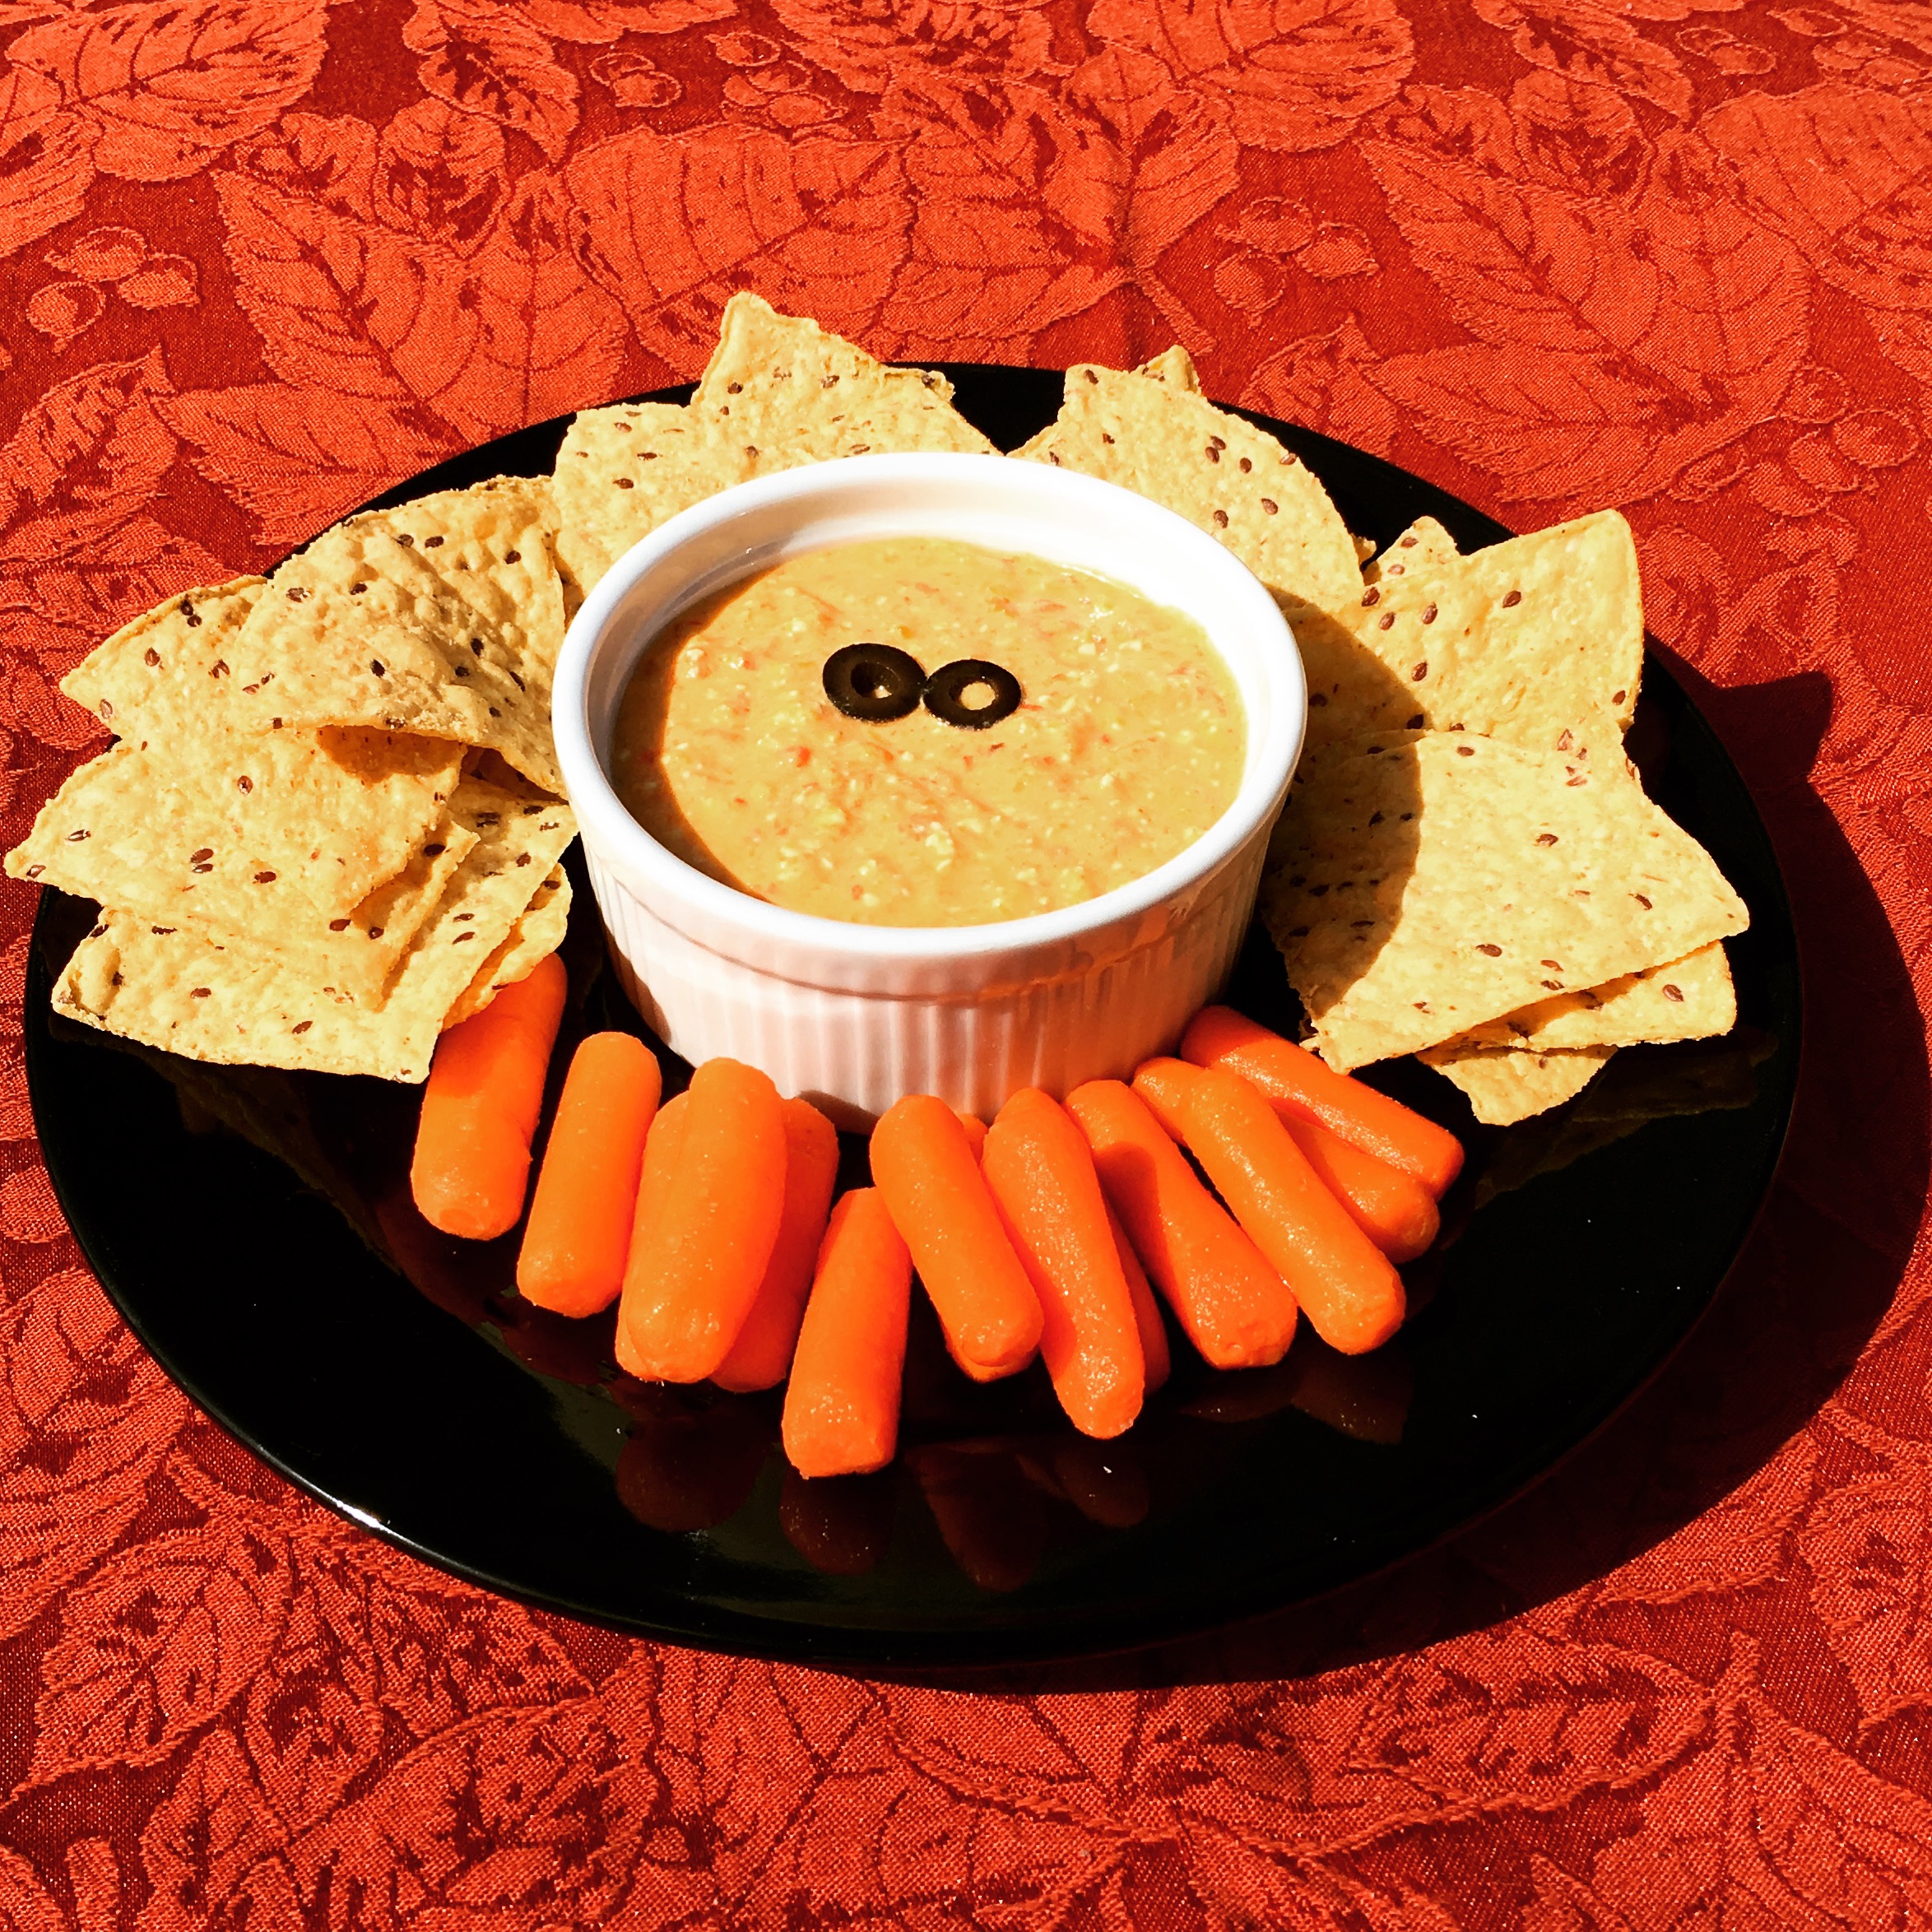 Feta and Roasted Red Pepper Dip